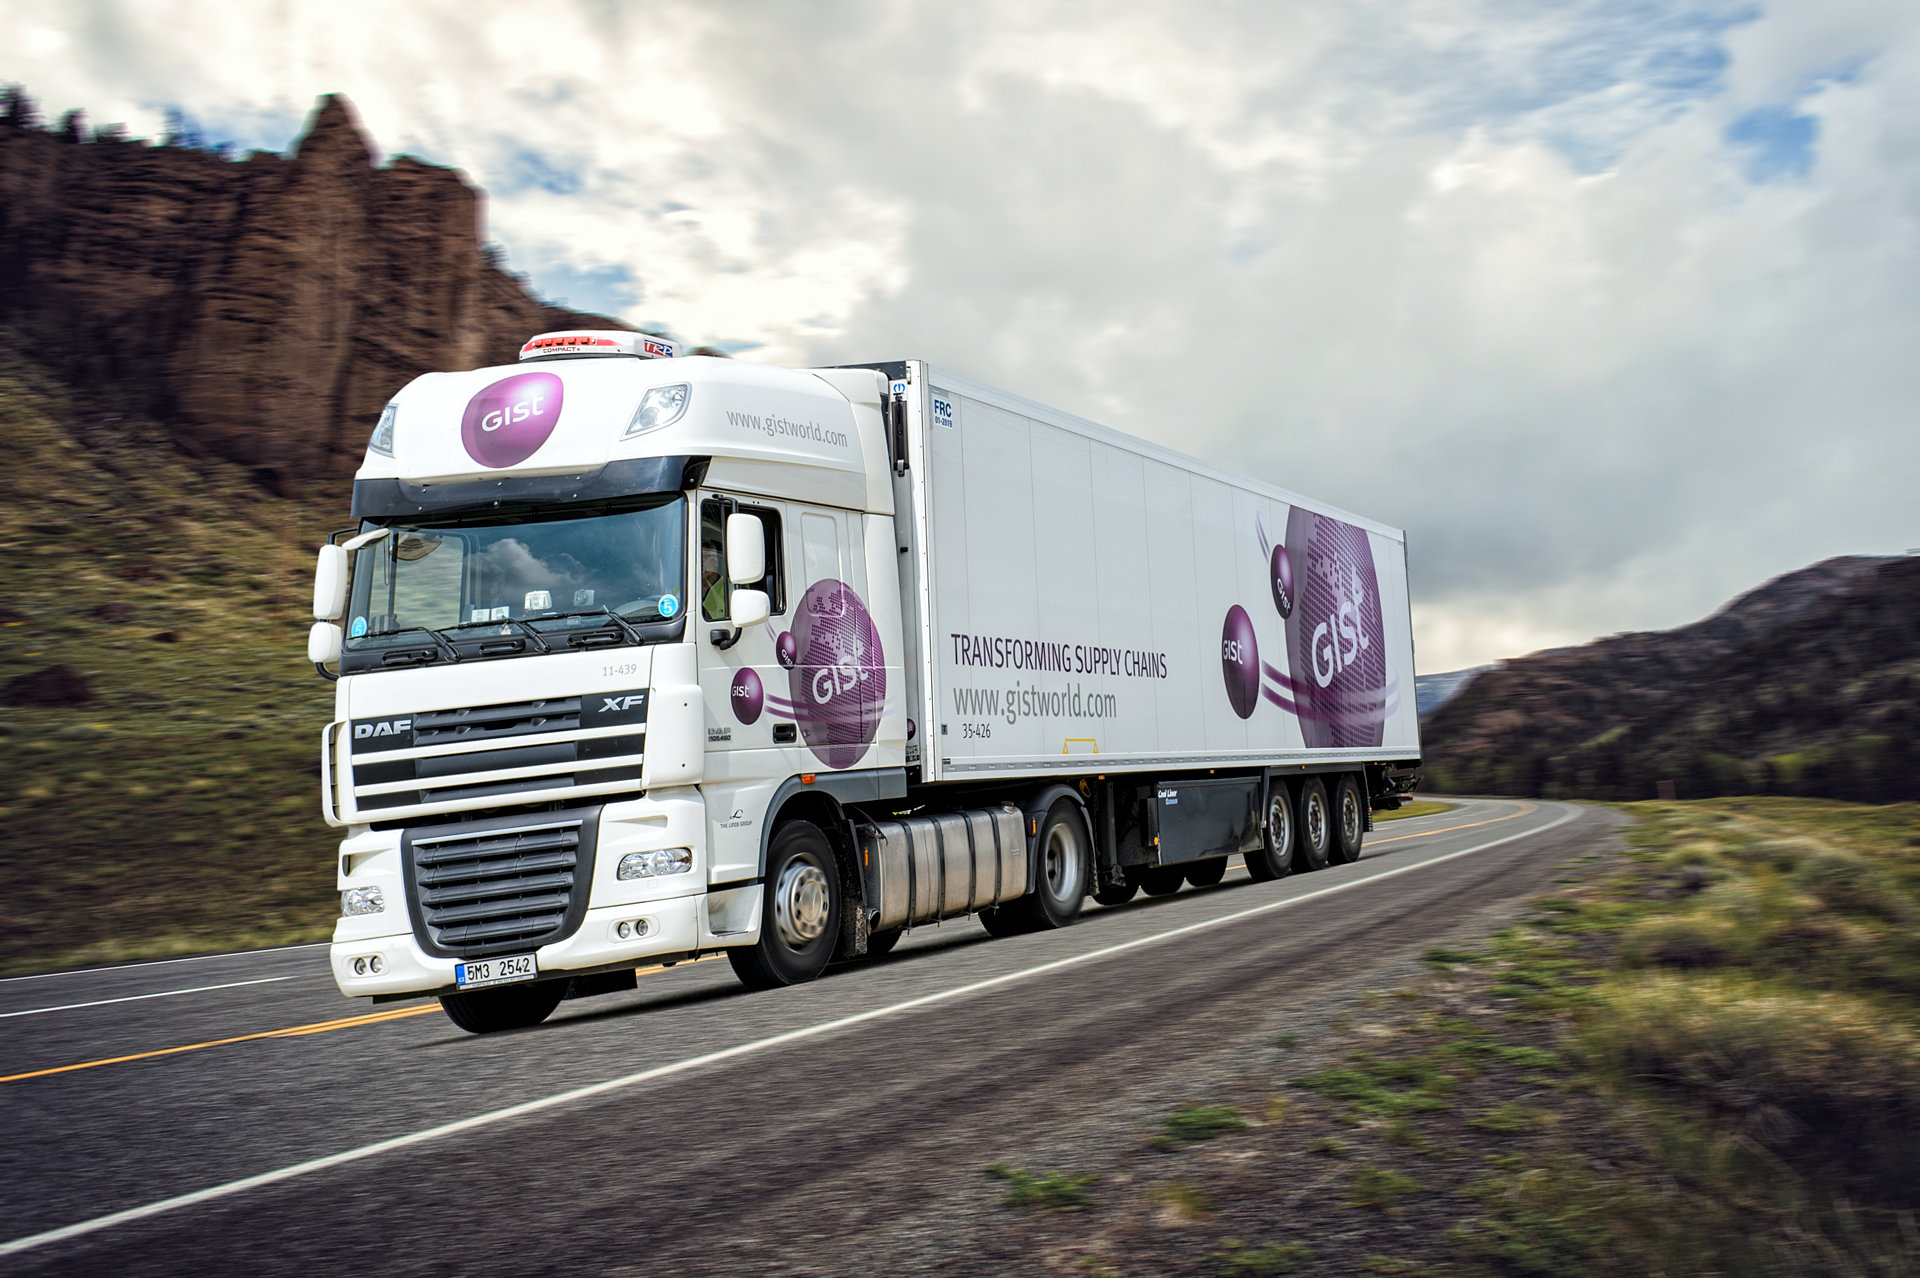 Marketing photograph for transport and logistics company Gist.